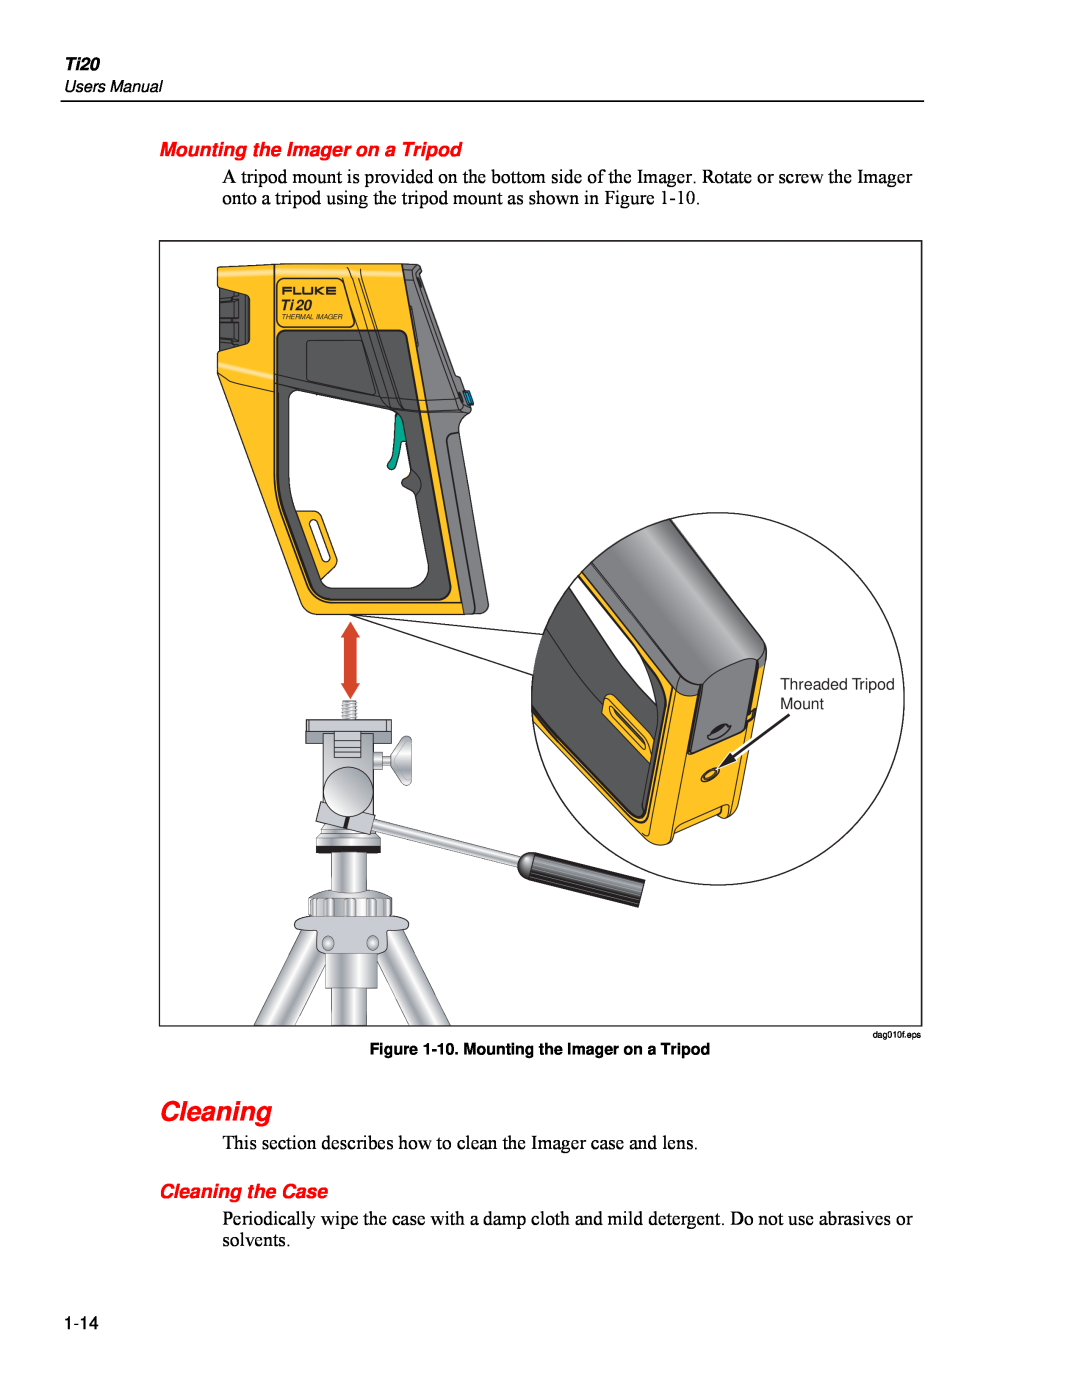 Fluke Ti20 user manual Mounting the Imager on a Tripod, Cleaning the Case 